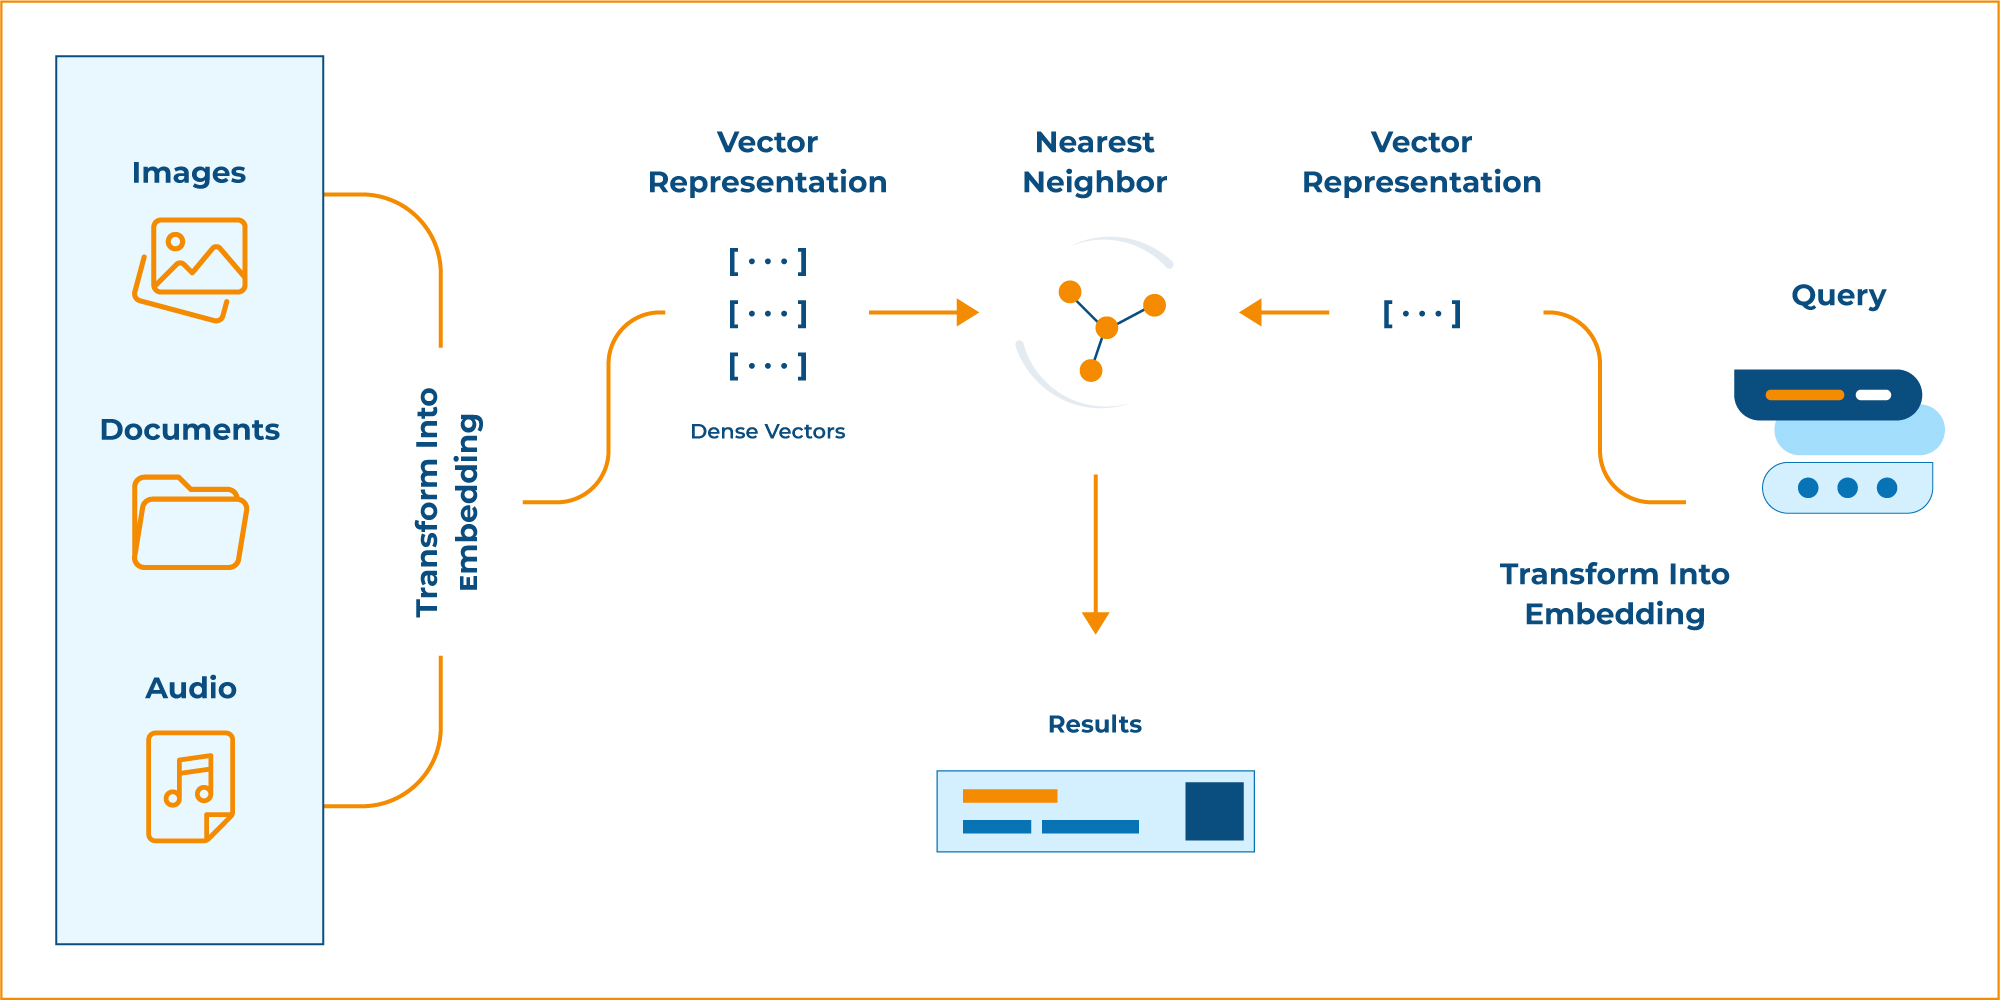 How vector search works?